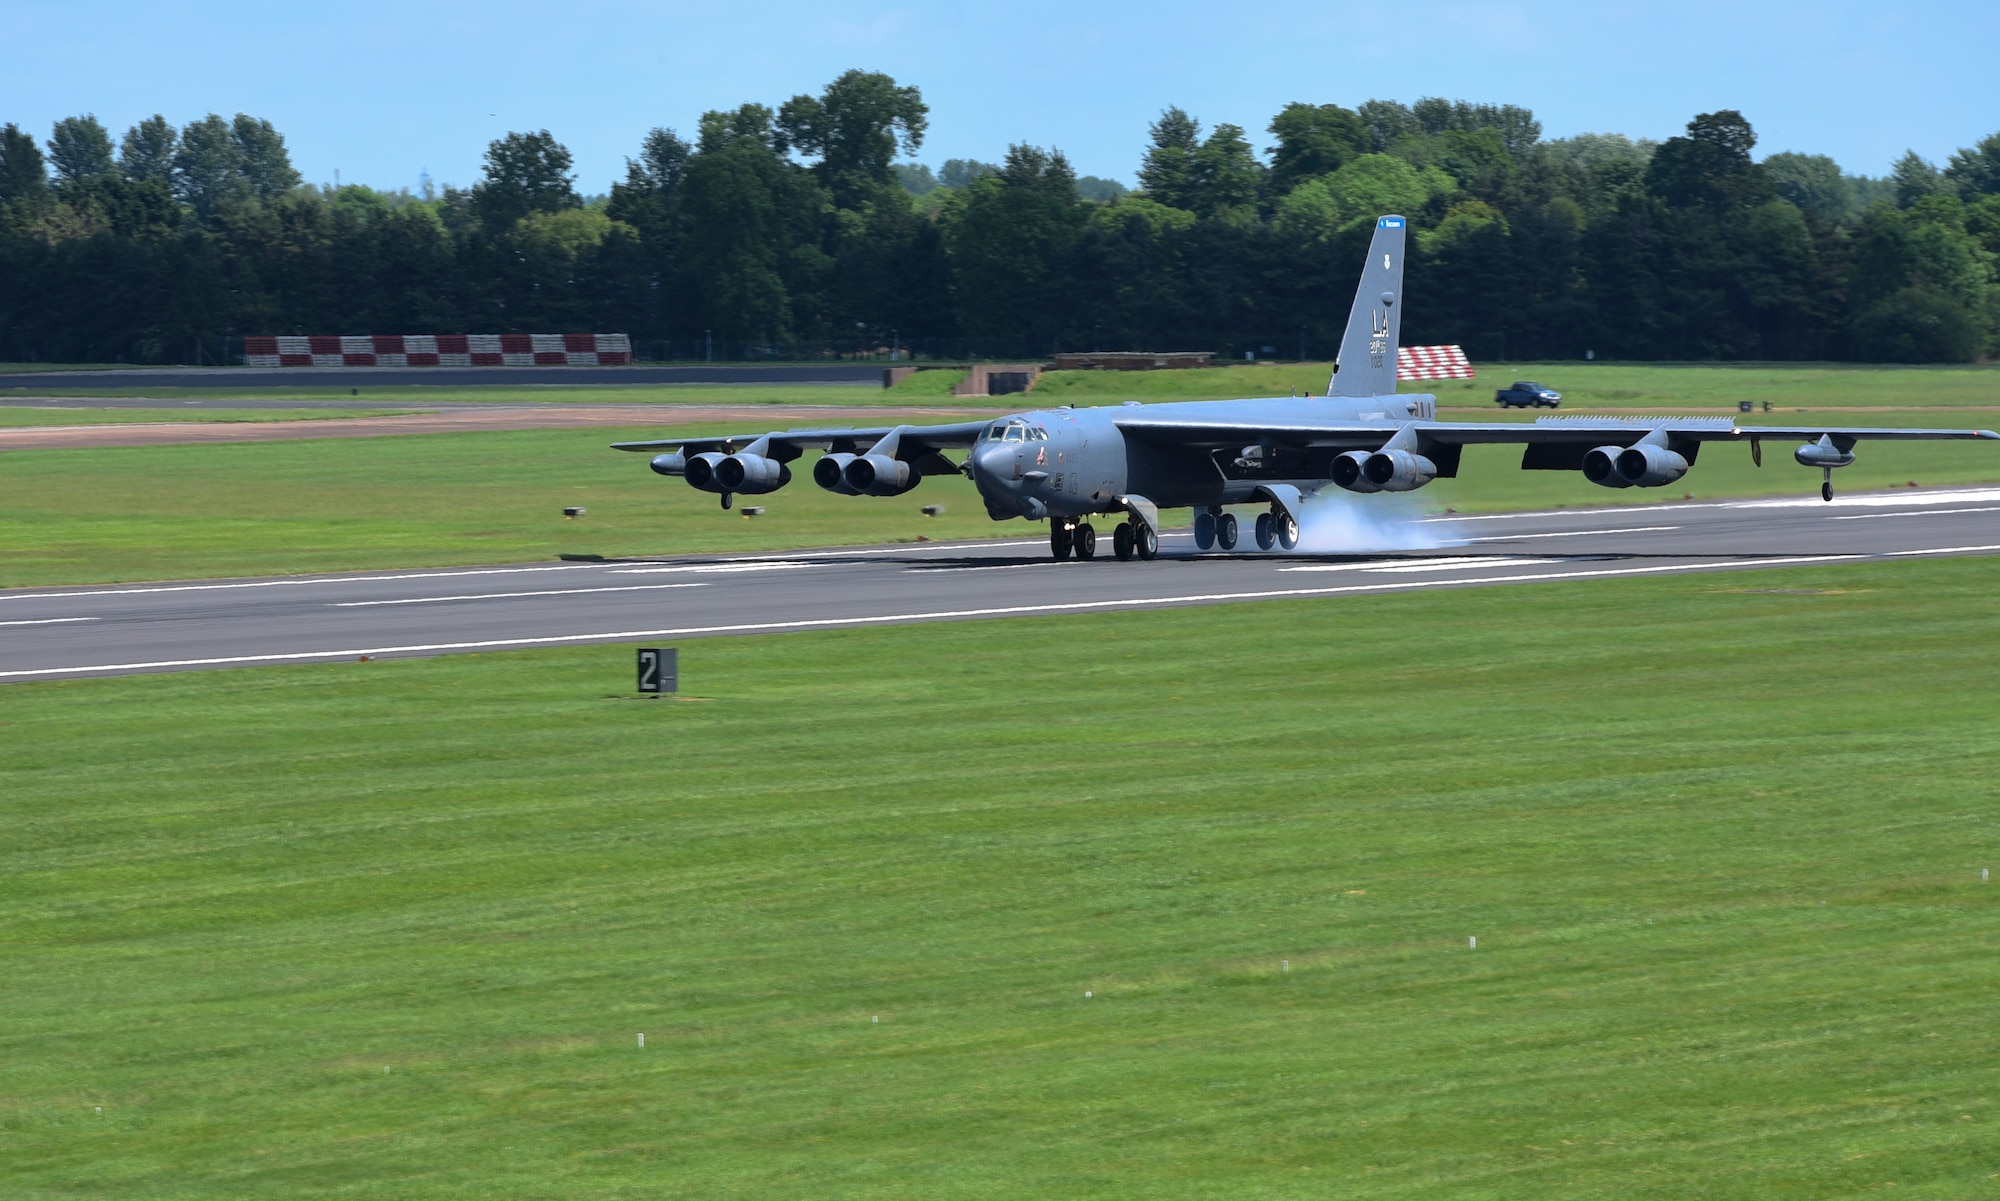 A B-52H Stratofortresses from Barksdale Air Force Base, La., touches down on the runway at RAF Fairford, U.K., June 1, 2017. These bombers will participate in exercises Saber Strike, Arctic Challenge and Baltic Operations (BALTOPS), in the European theatre. These operations and engagements with allies and partners demonstrate and strengthen America’s commitment to global security and stability. (U.S. Air Force photo by Airman 1st Class Randahl J. Jenson)